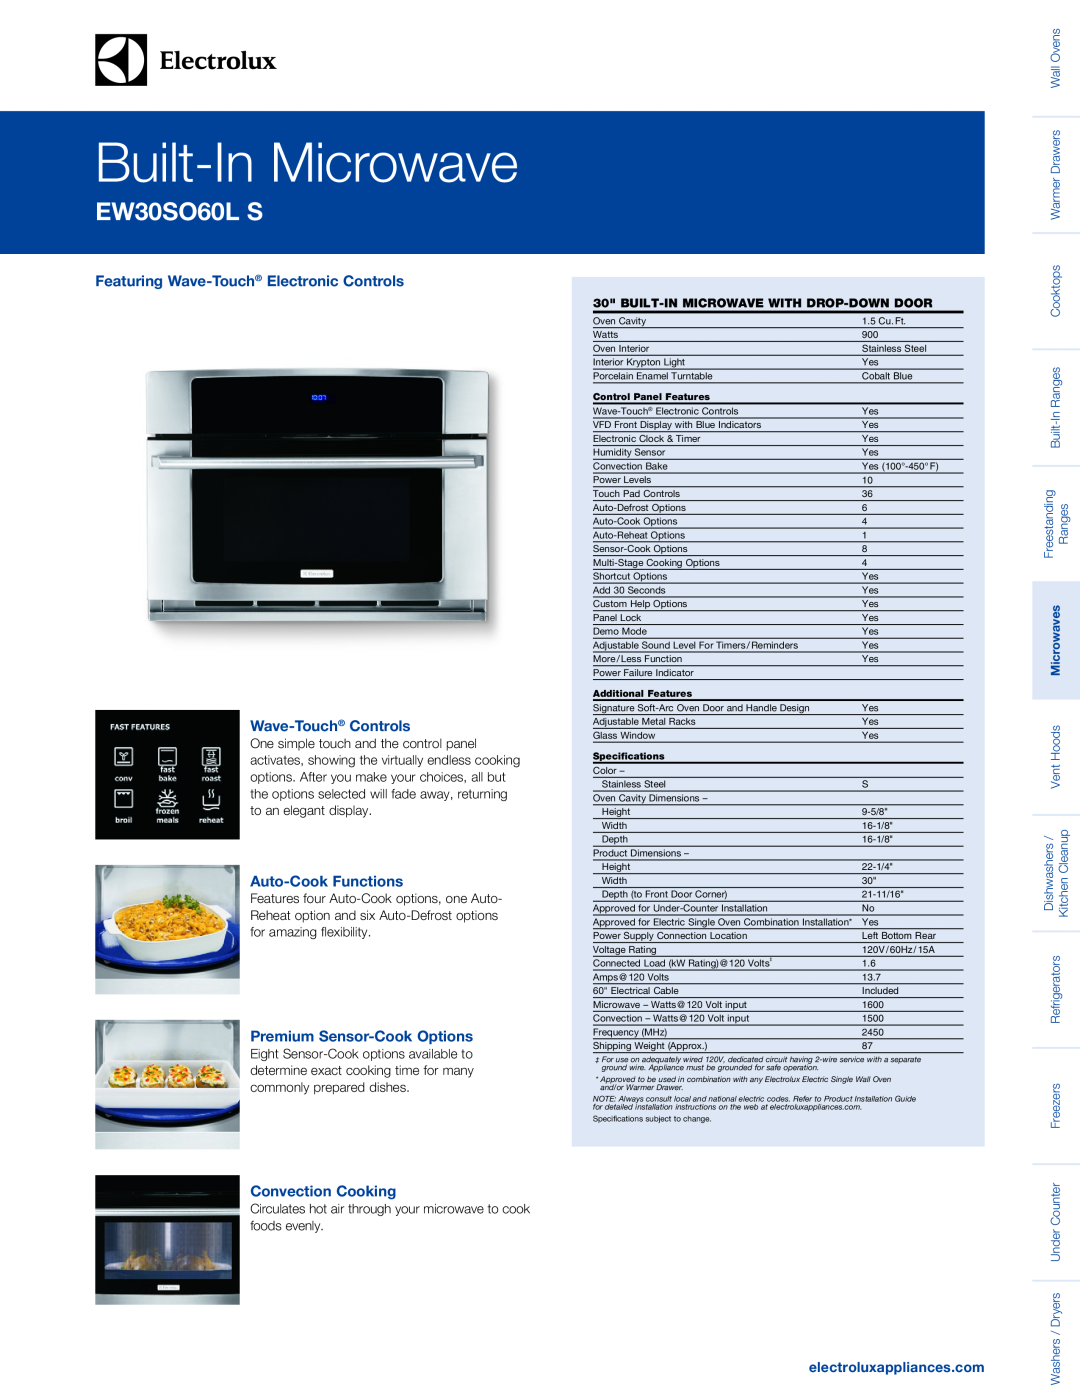 Electrolux EW30SO60L S specifications Featuring Wave-Touch Electronic Controls Wave-Touch Controls, Auto-Cook Functions 